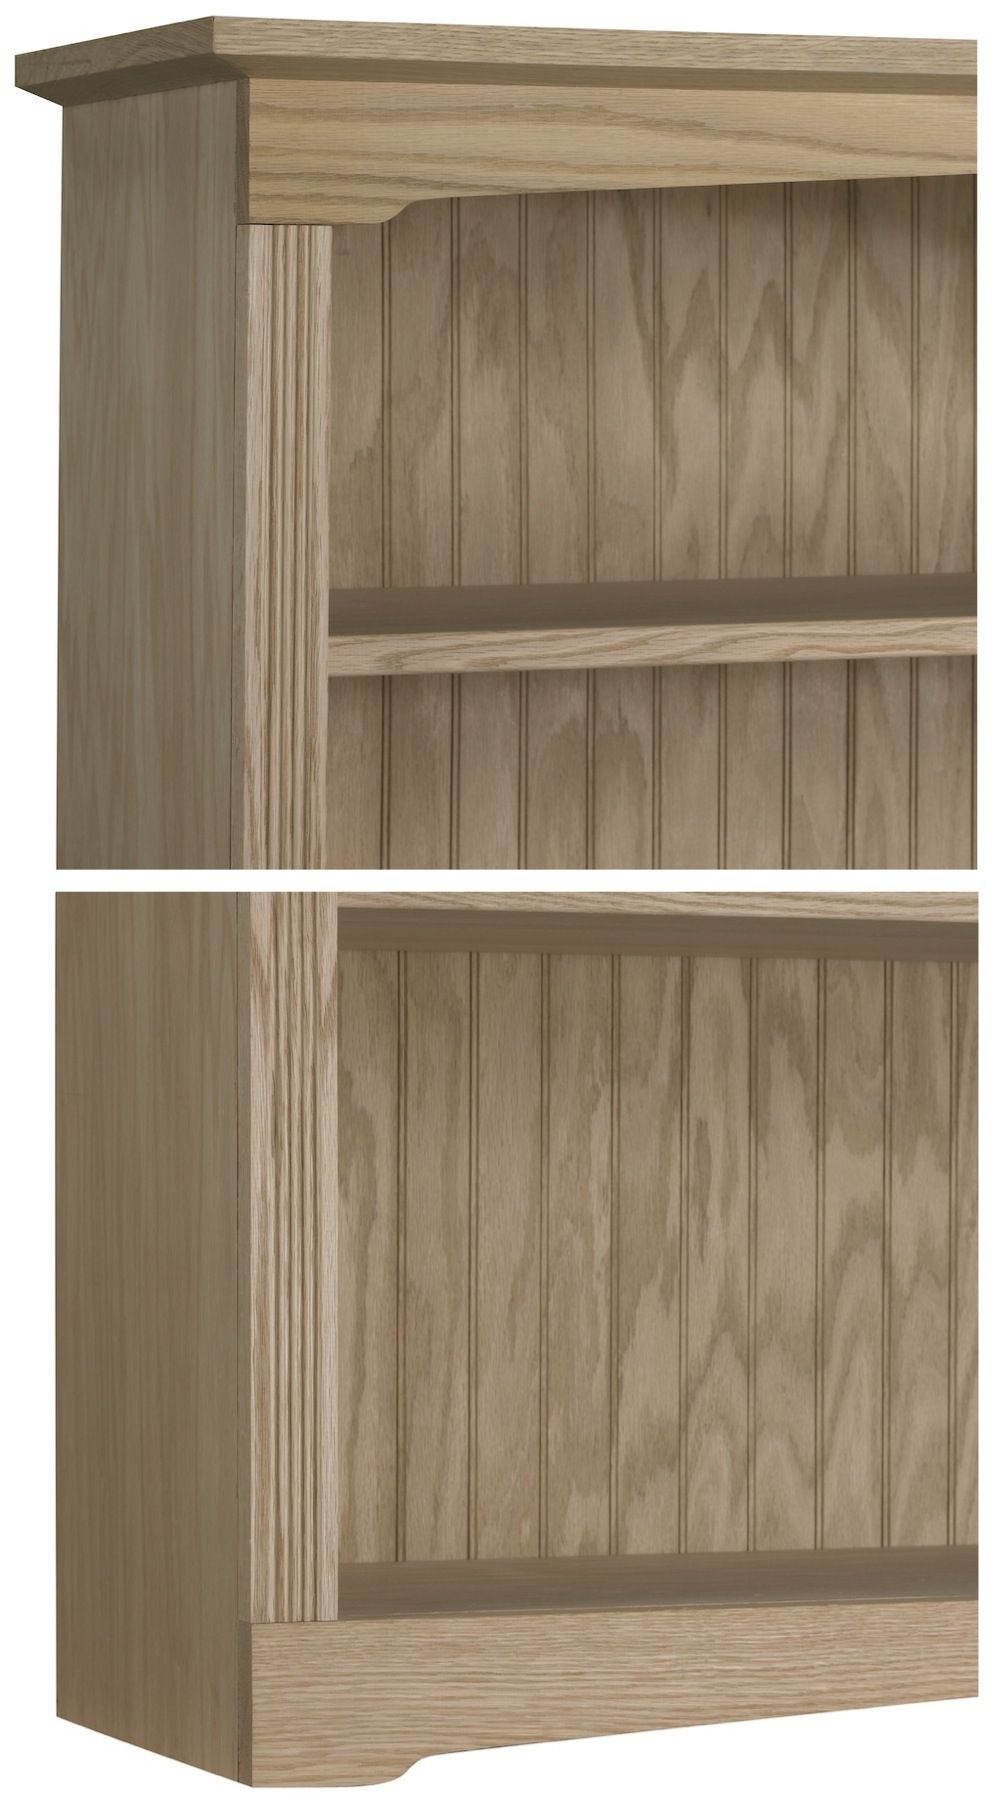 Arthur Brown Custom Bookcase Styles Inside Bookcase With Cupboard Base (View 13 of 15)